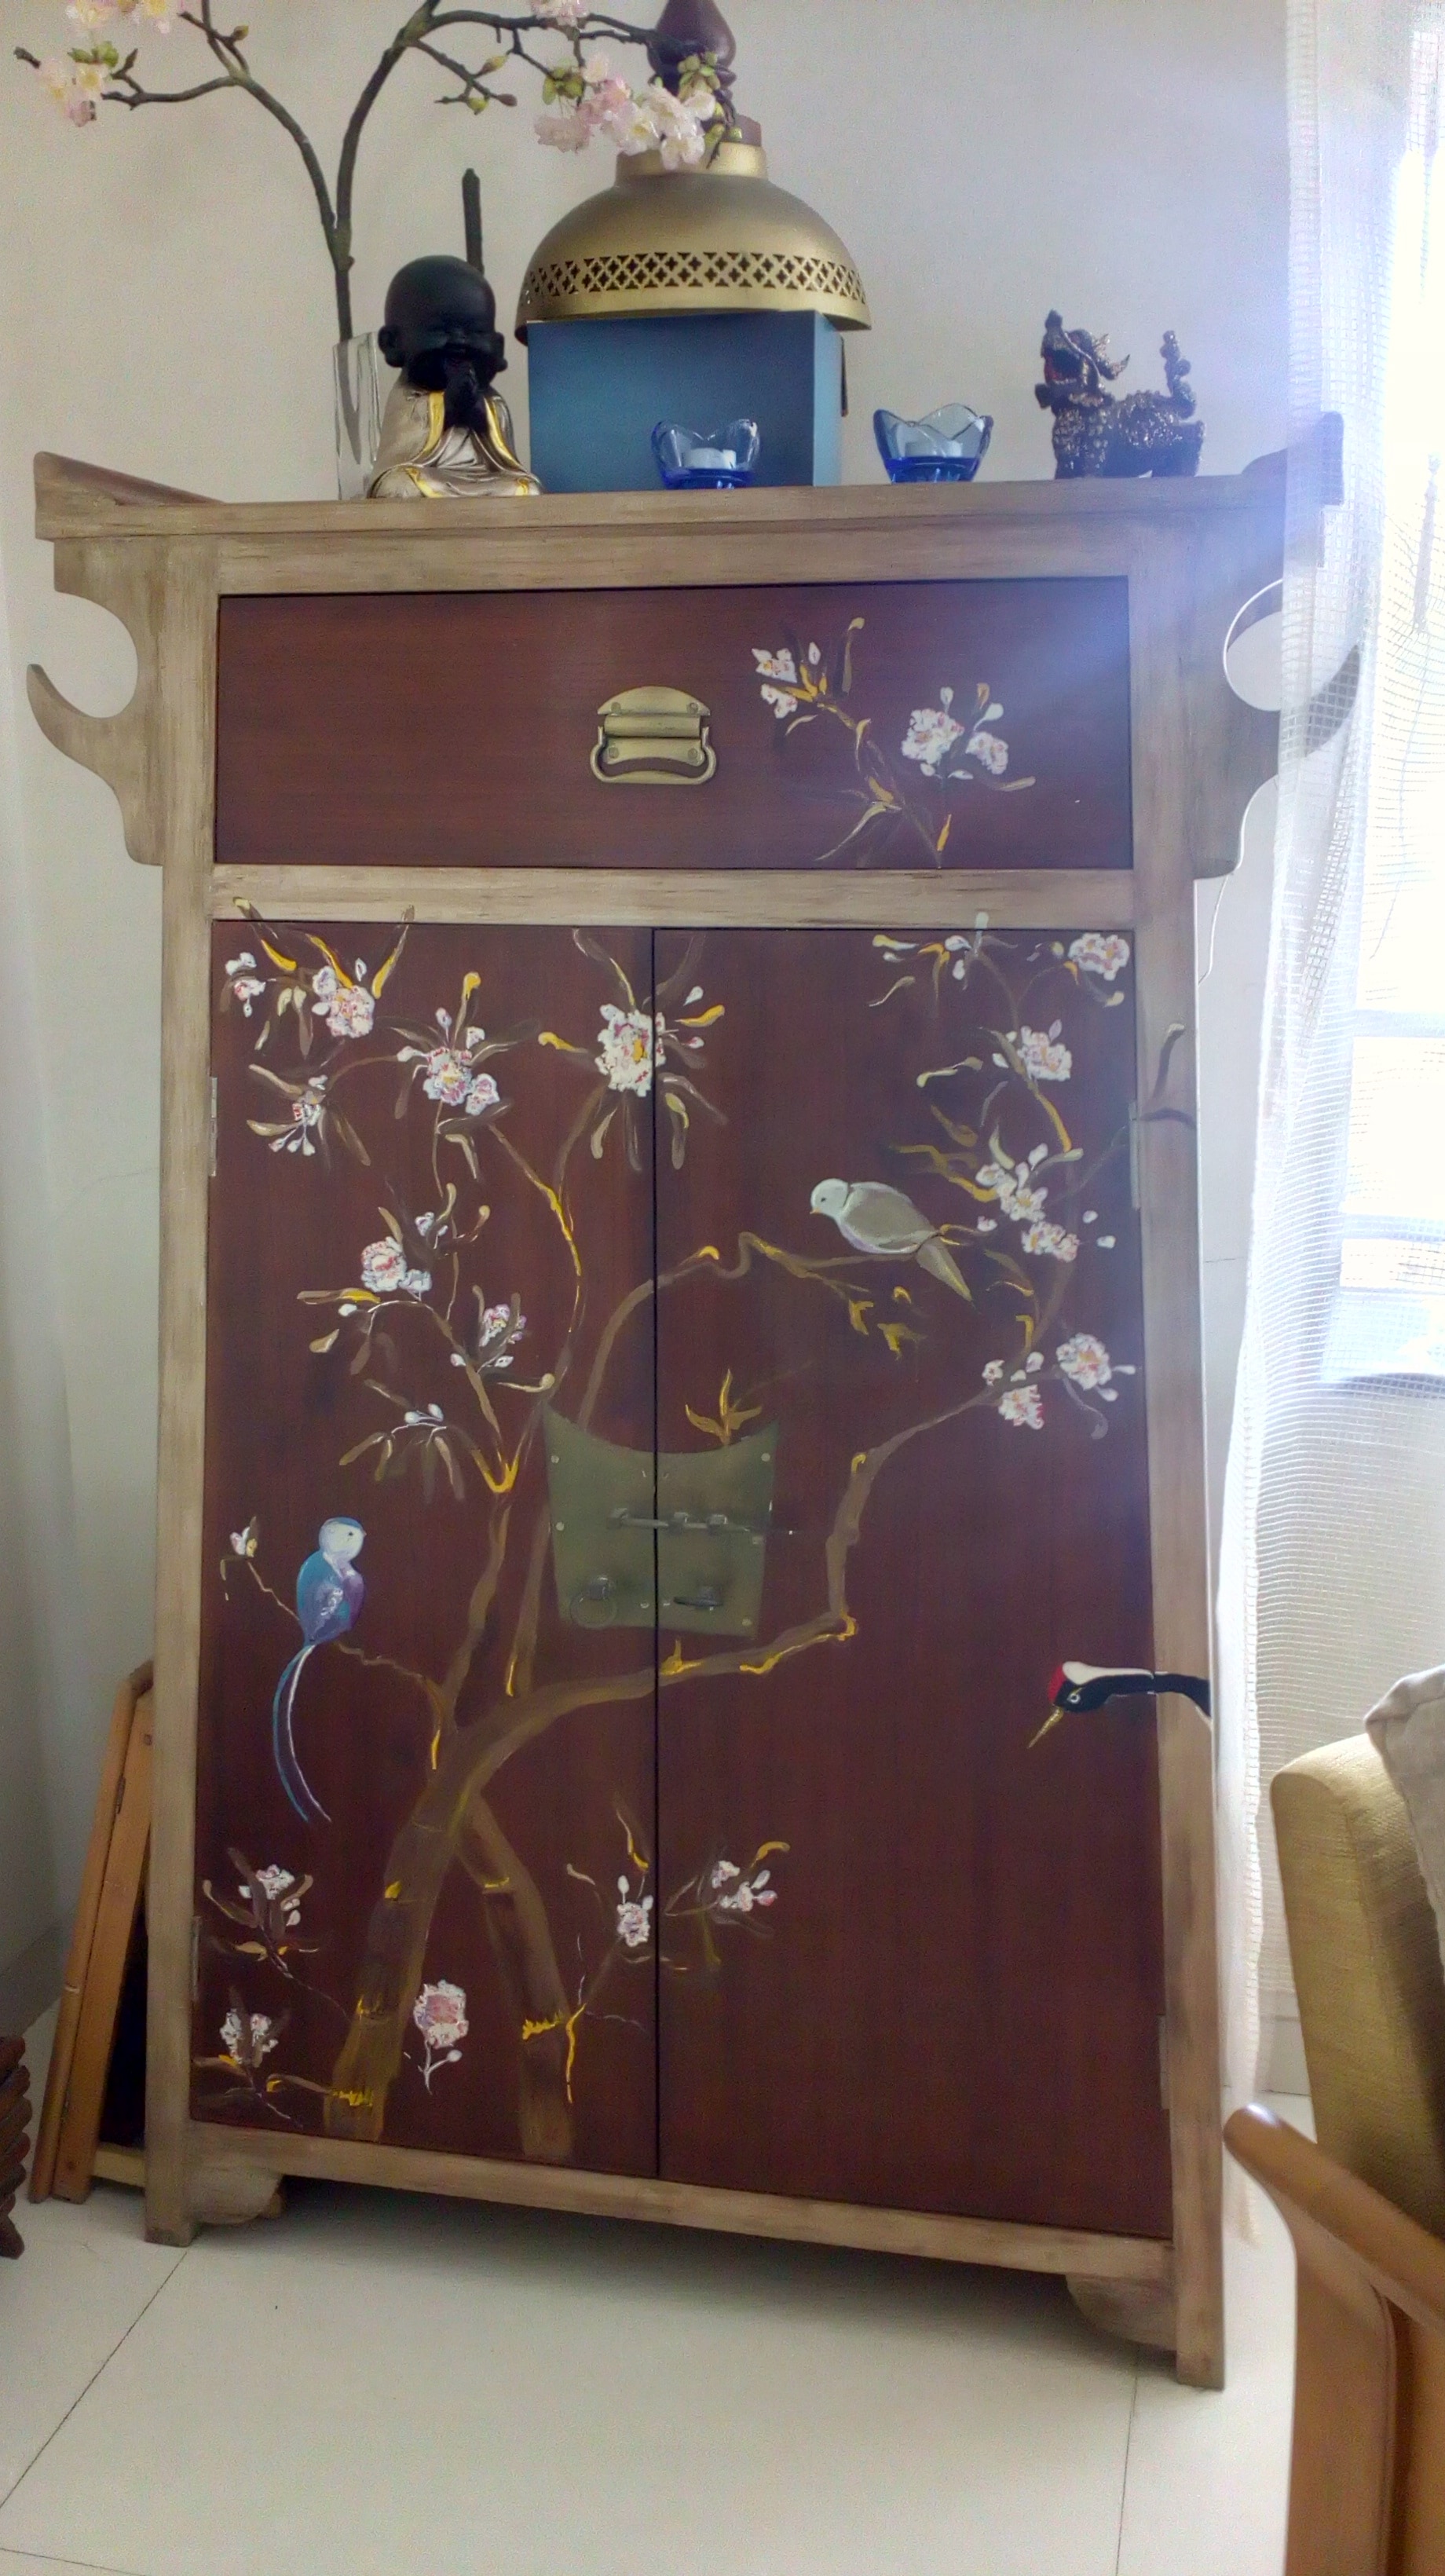 A cabinet with fly eave-looking edges is painted with the cherry blossom tree and birds perched on its branches.